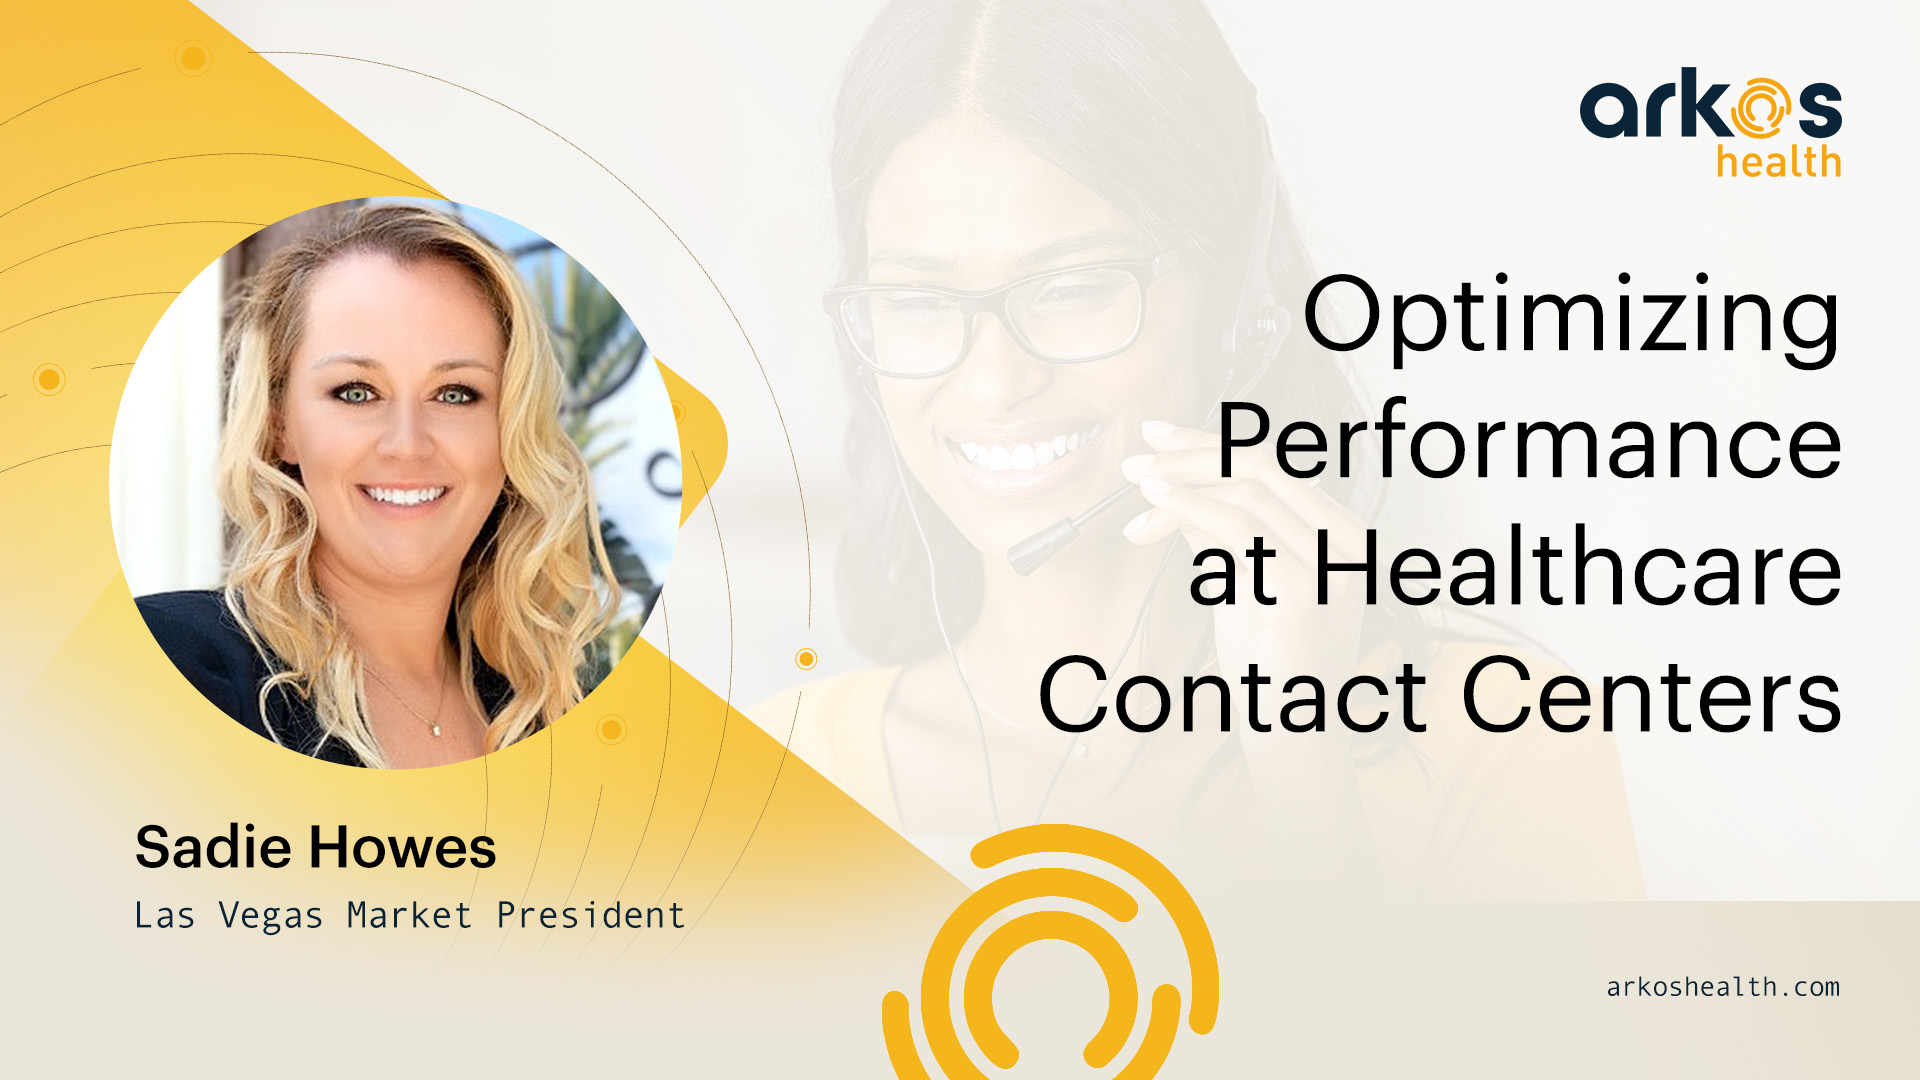 Five Healthcare Contact Center Trends That Are Improving Patient Outcomes While Addressing Rising Costs